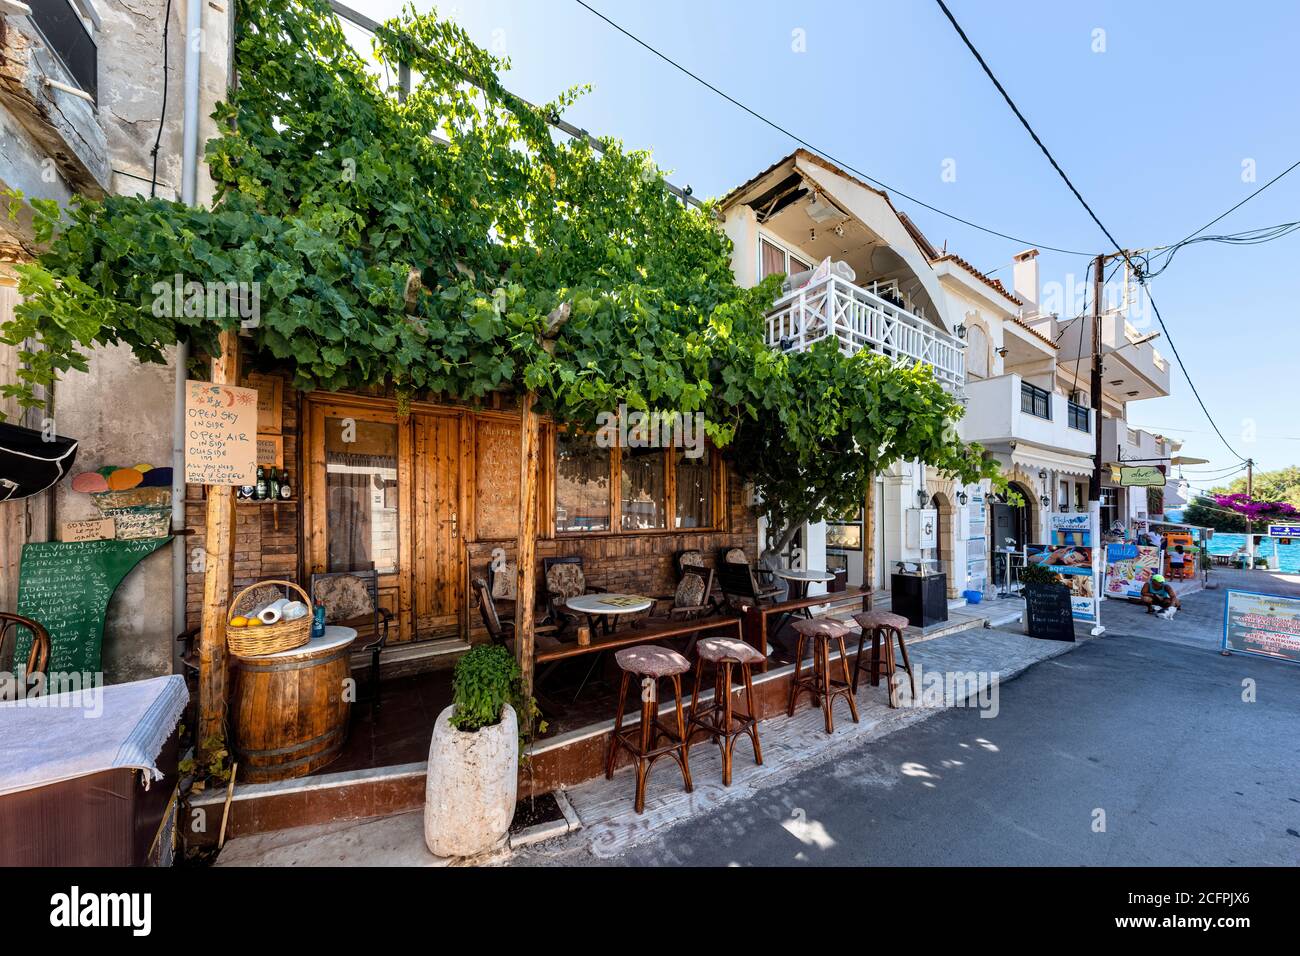 PANORMOS IN RETHYMNO, GREECE - AUGUST 7: (EDITORS NOTE: Image has been digitally enhanced.) Streets and stores are nearly empty because of the economic crisis and pandemic on August 7, 2020 in Panormos in Rethymno, Greece. Stock Photo